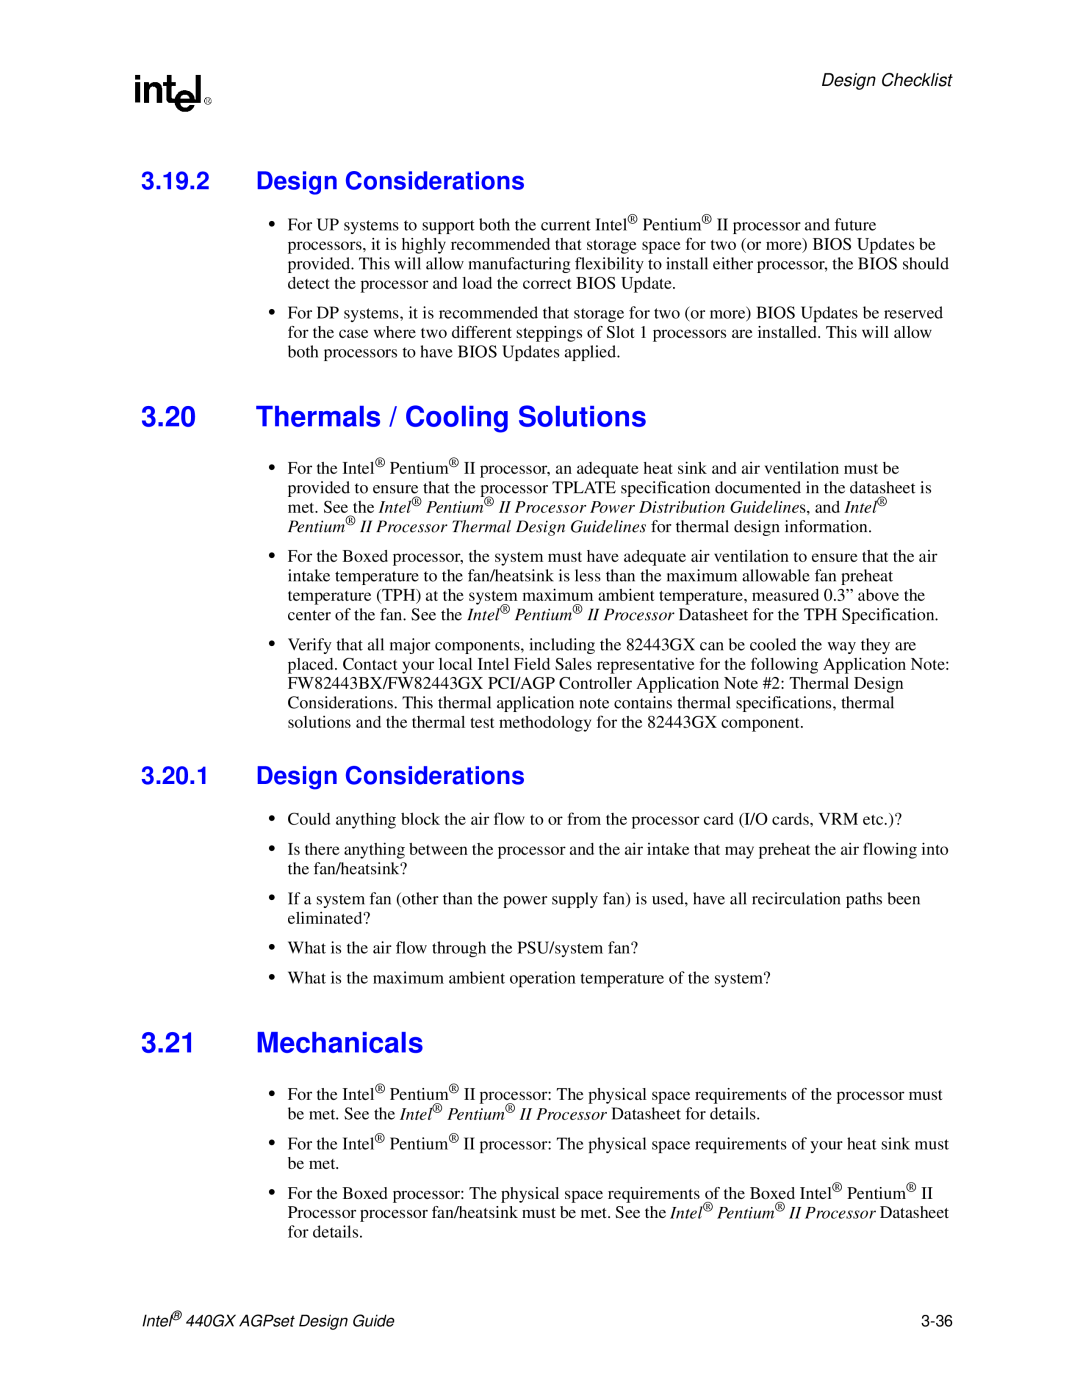 Intel 440GX manual Thermals / Cooling Solutions, Mechanicals, Design Considerations, Design Checklist 